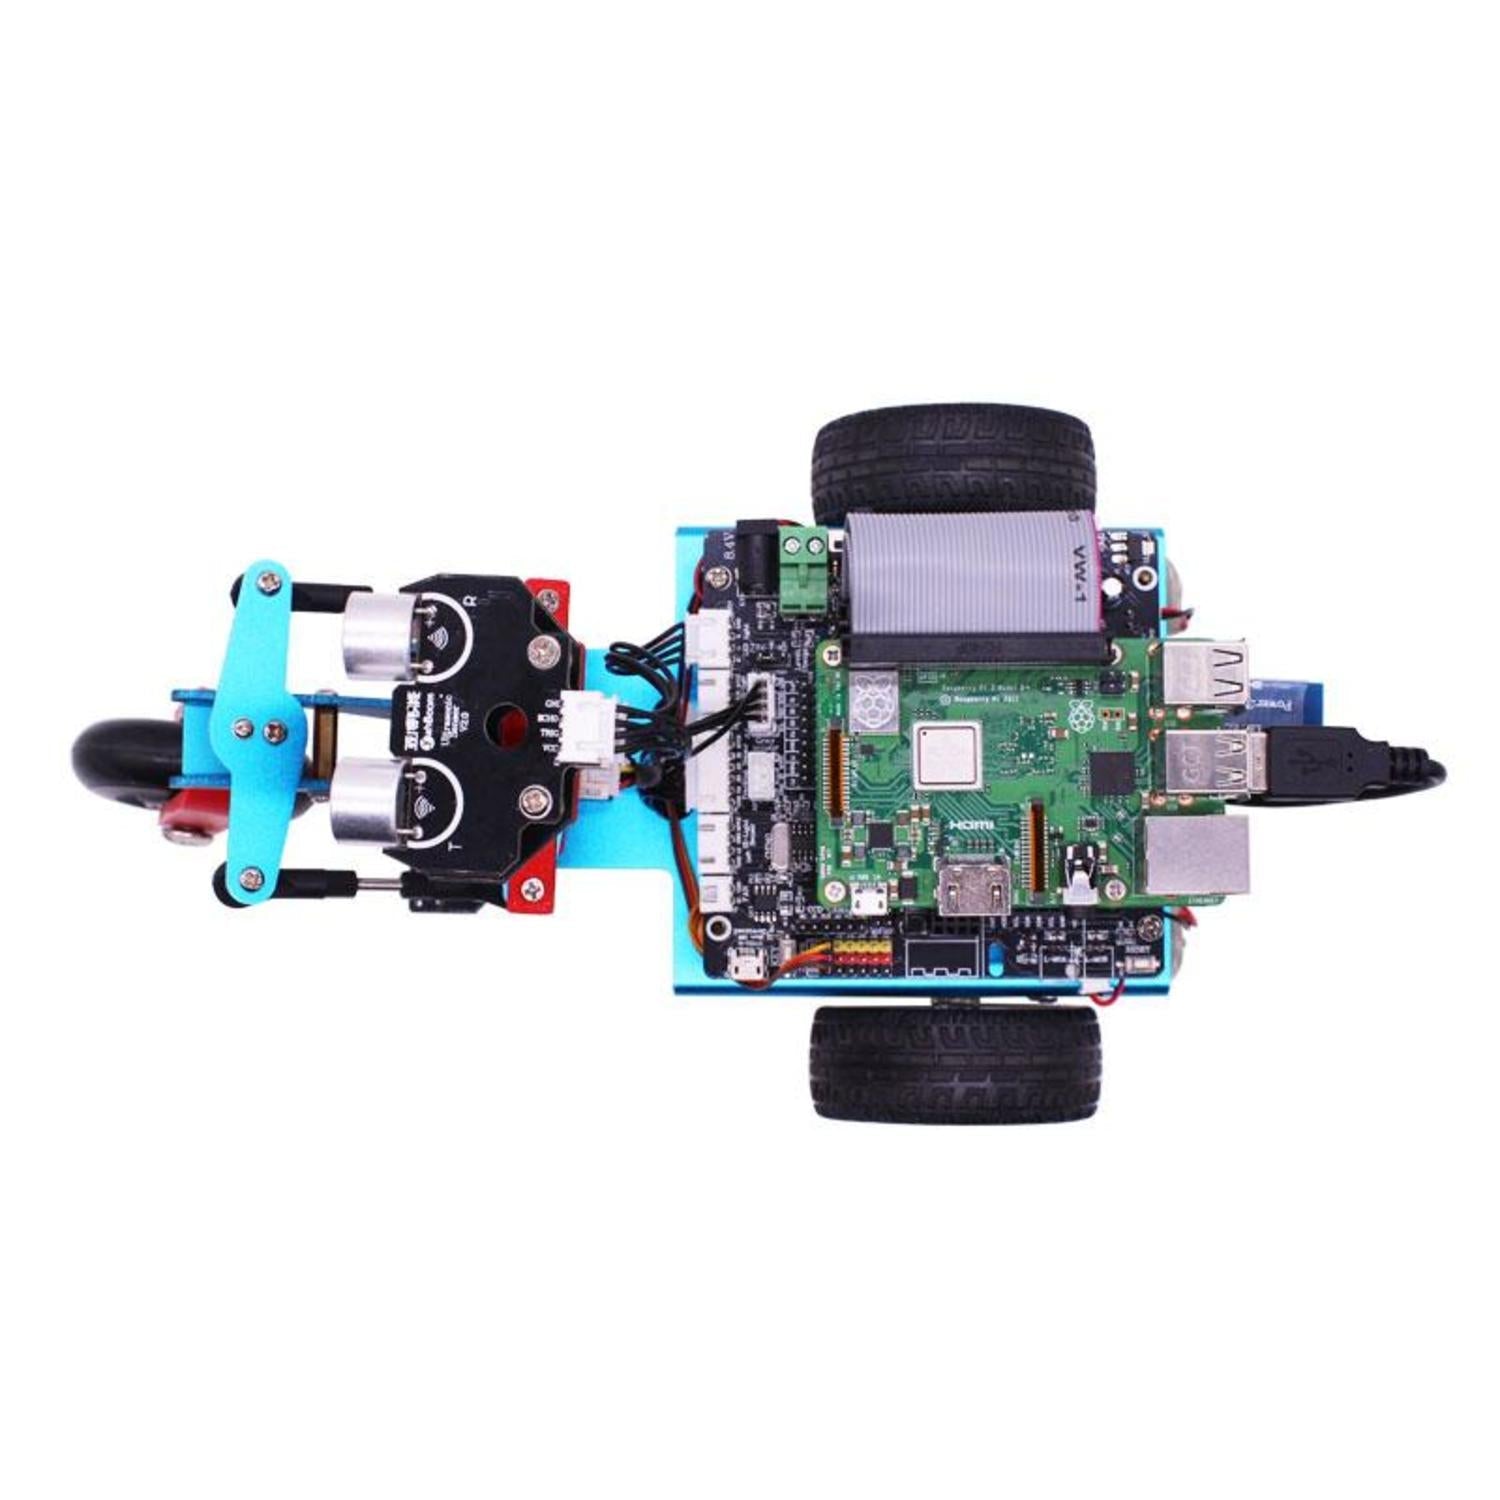 Yahboom Trikebot smart robot with WIFI camera for Raspberry Pi 4B/3B+